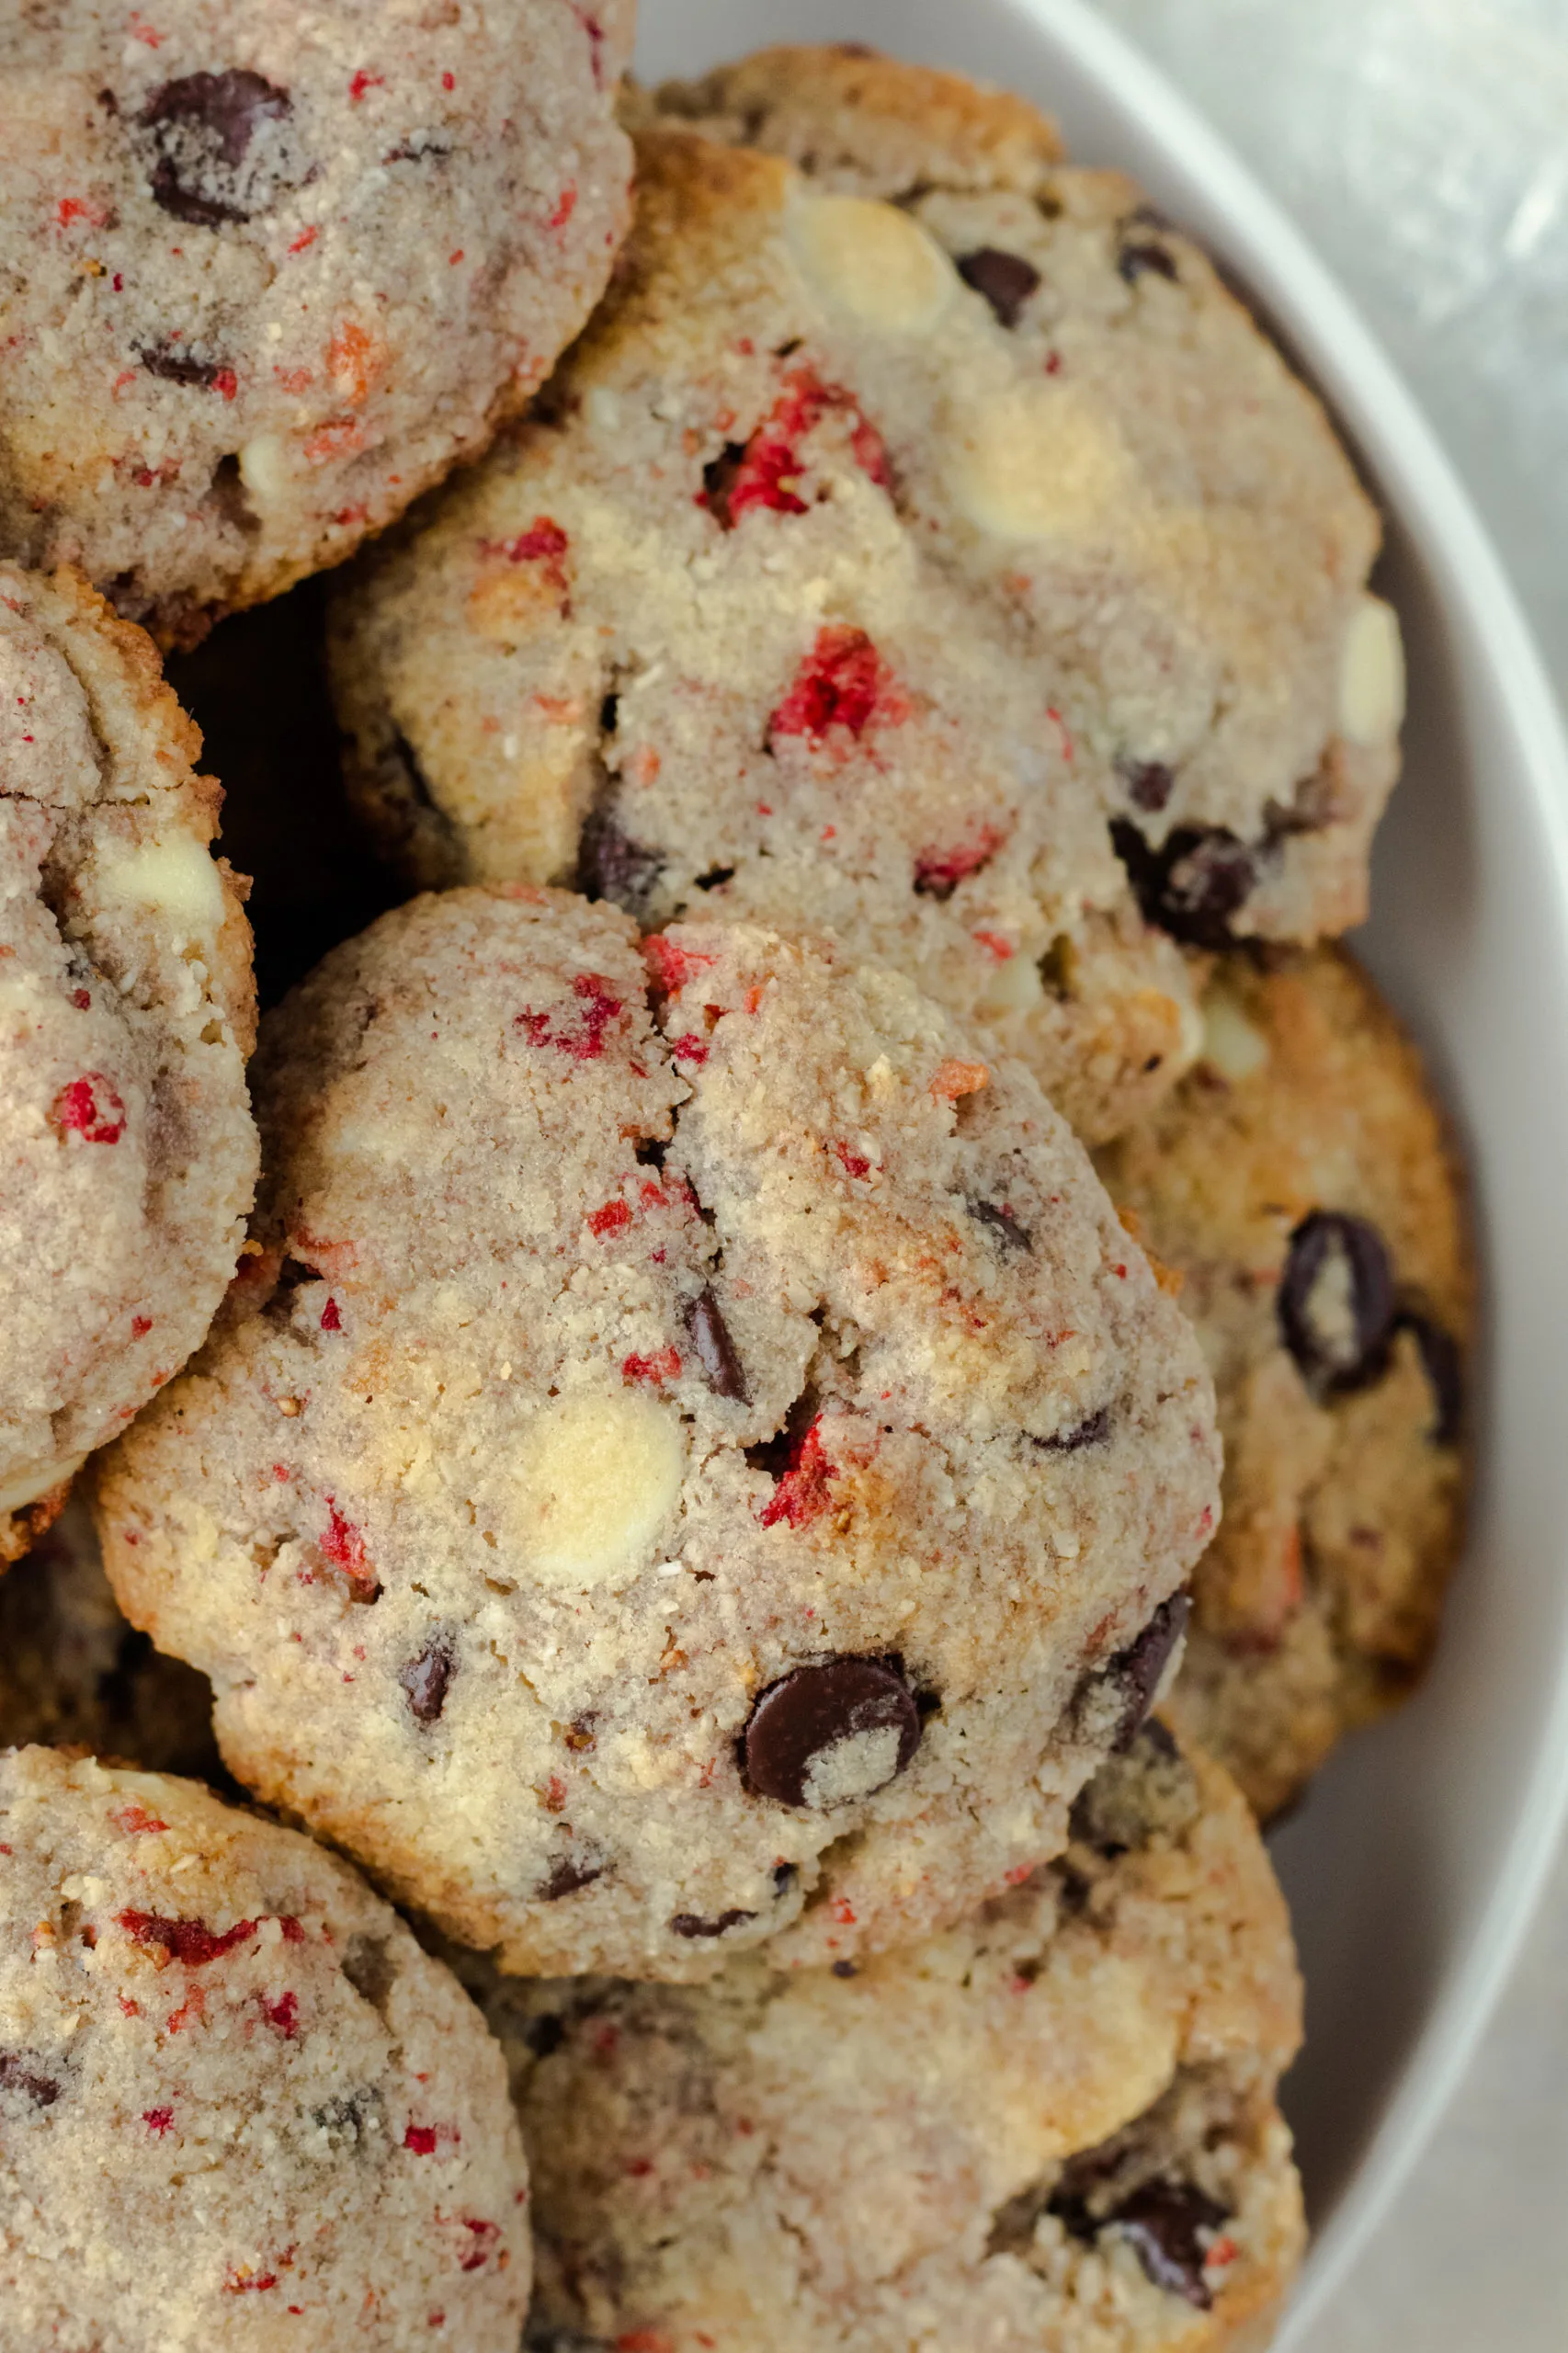 Low carb cookies with strawberries, dark chocolate, and white chocolate chips.